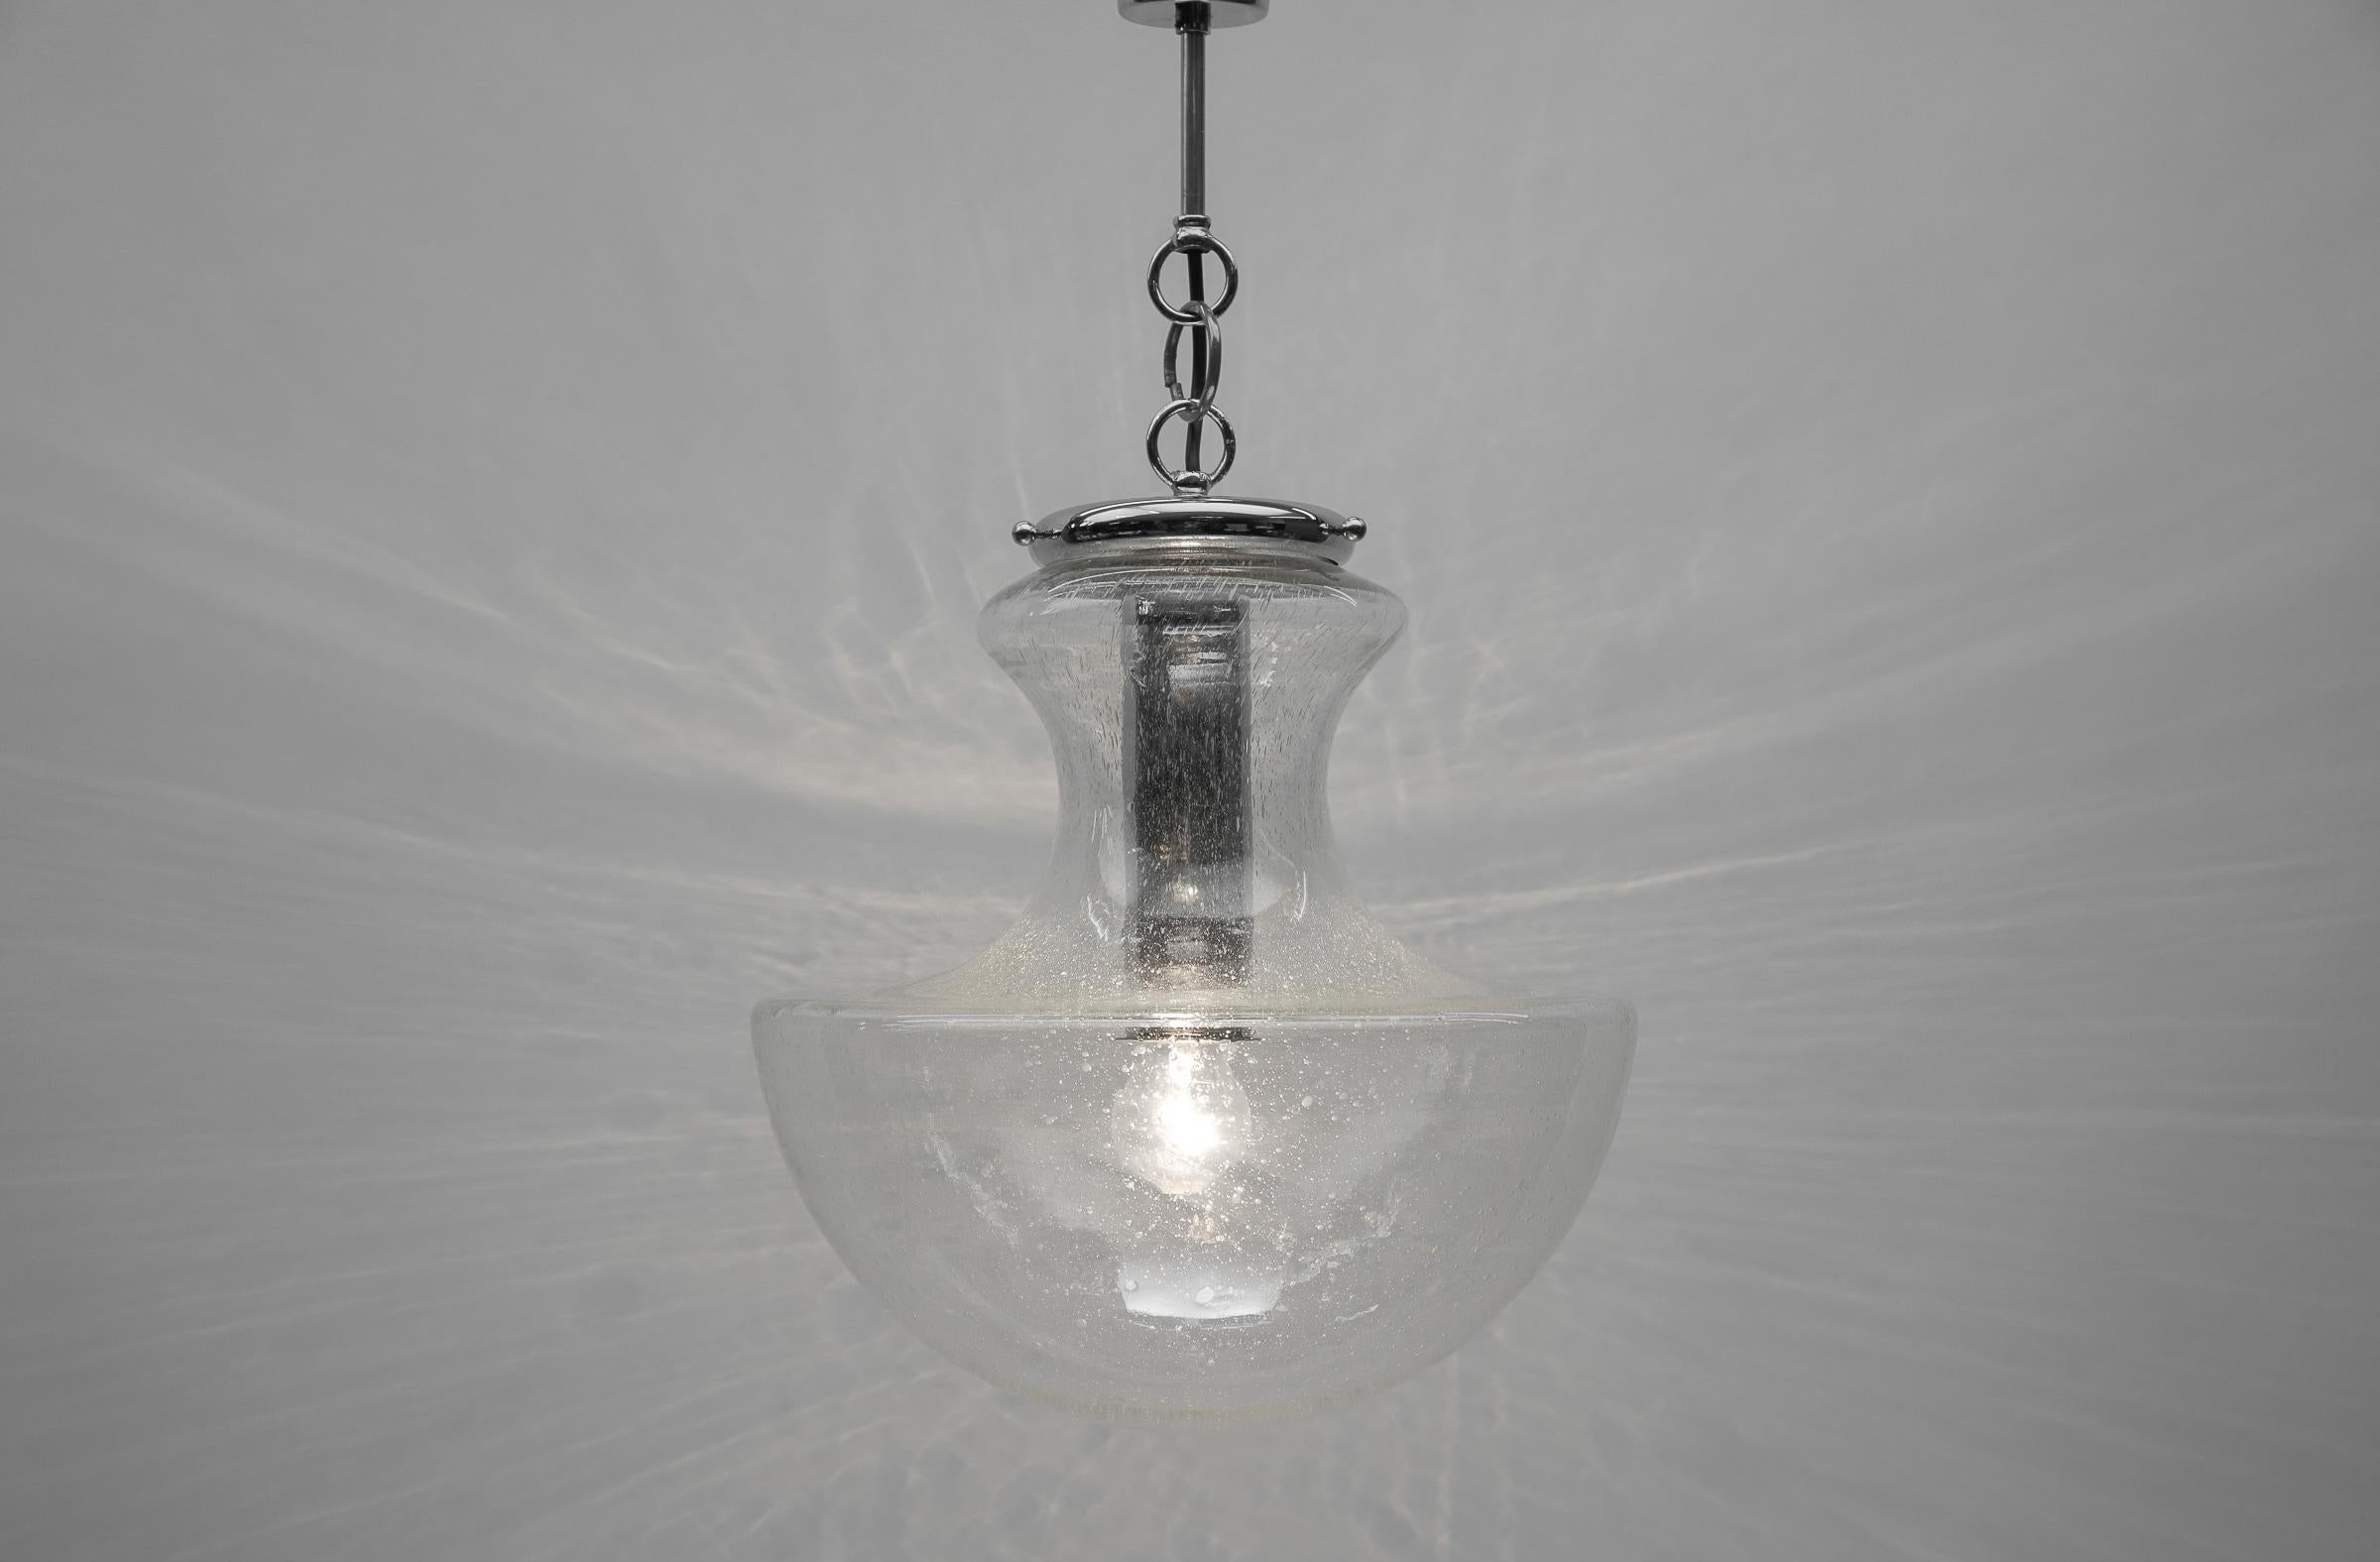 Mid Century Modern Chrome & Bubble Glass Pendant Lamp, 1960s Germany

Dimensions
Diameter: 13.77 in. (35 cm)
Height adjustable: 23.62 in. (60)

Four E14 sockets and one E27 socket. Works with 220V and 110V.

Our lamps are checked, cleaned and are